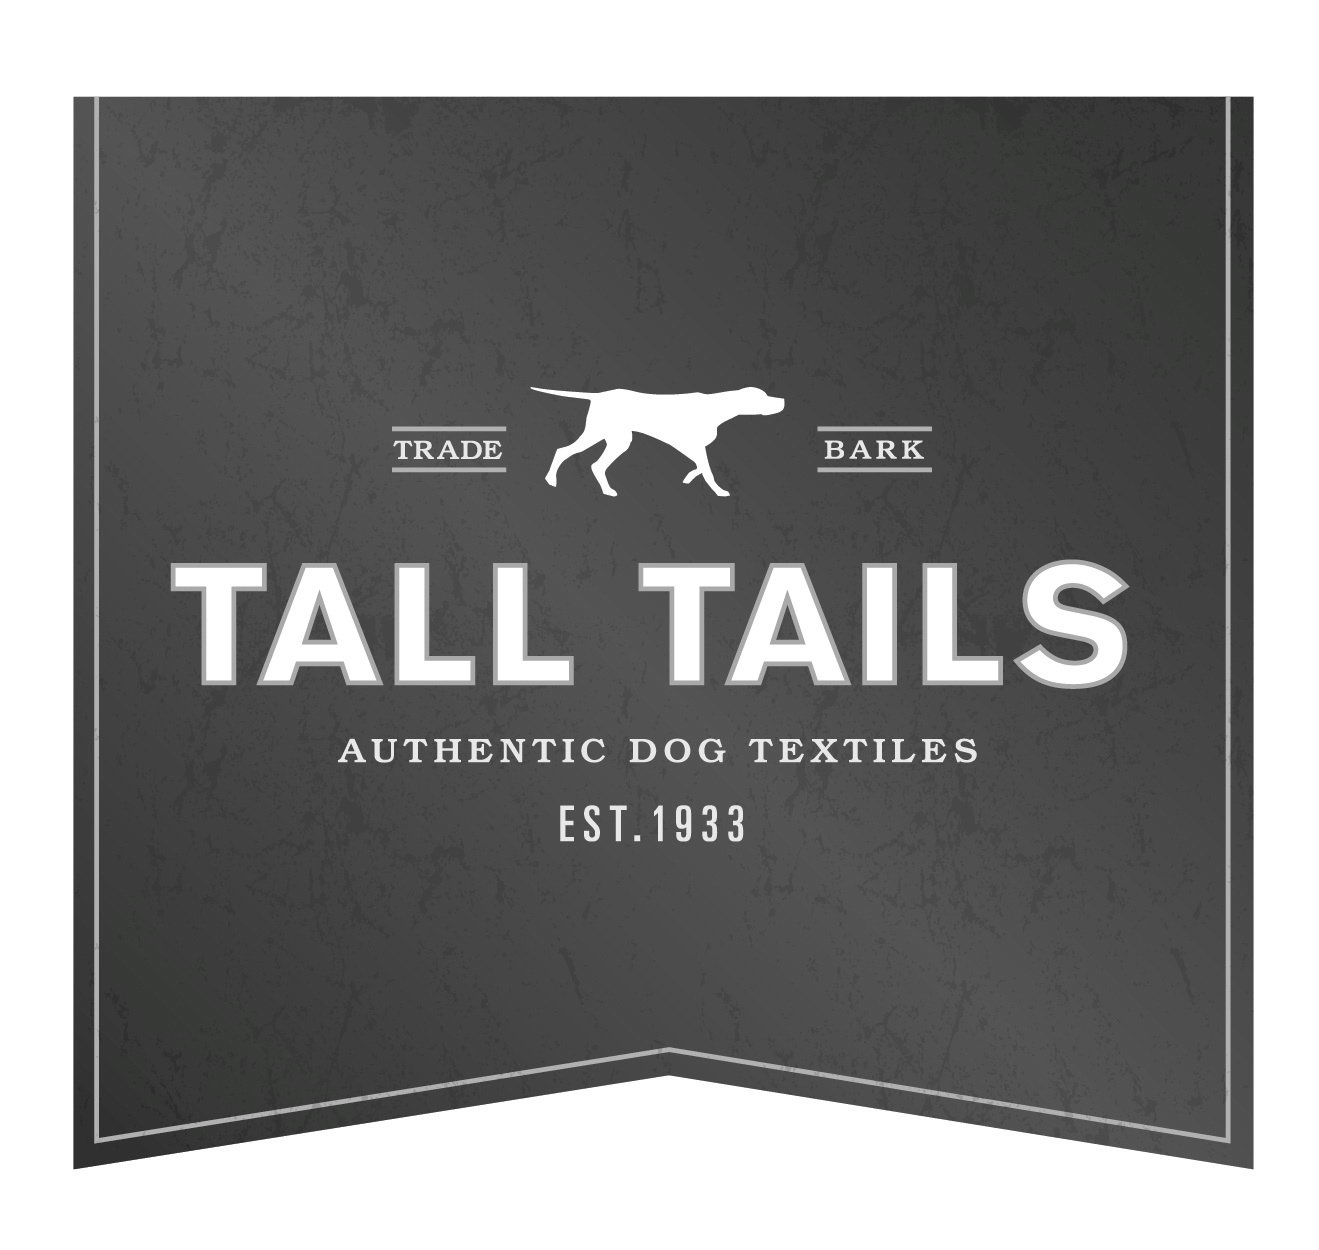 Trademark Logo TRADE BARK TALL TAILS AUTHENTIC DOG TEXTILES EST. 1933